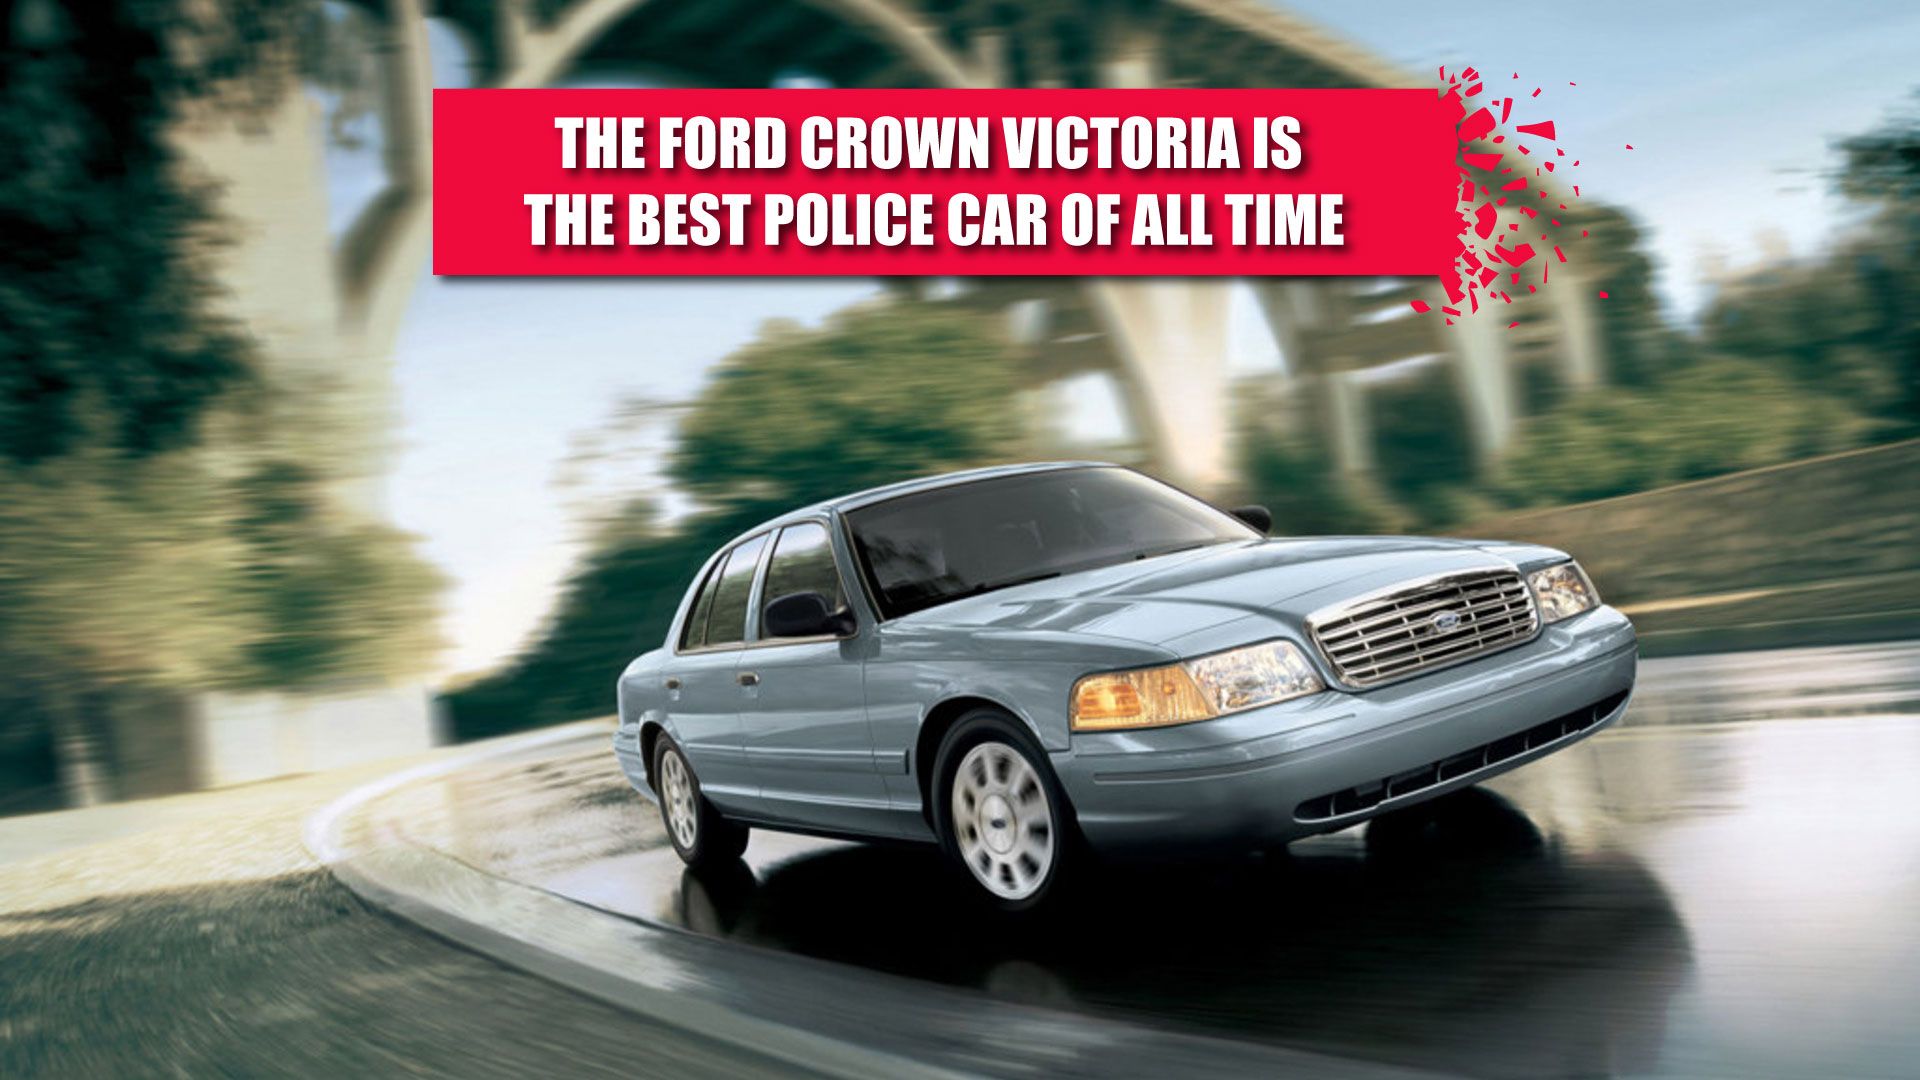 Ford Crown Victoria Featured Image